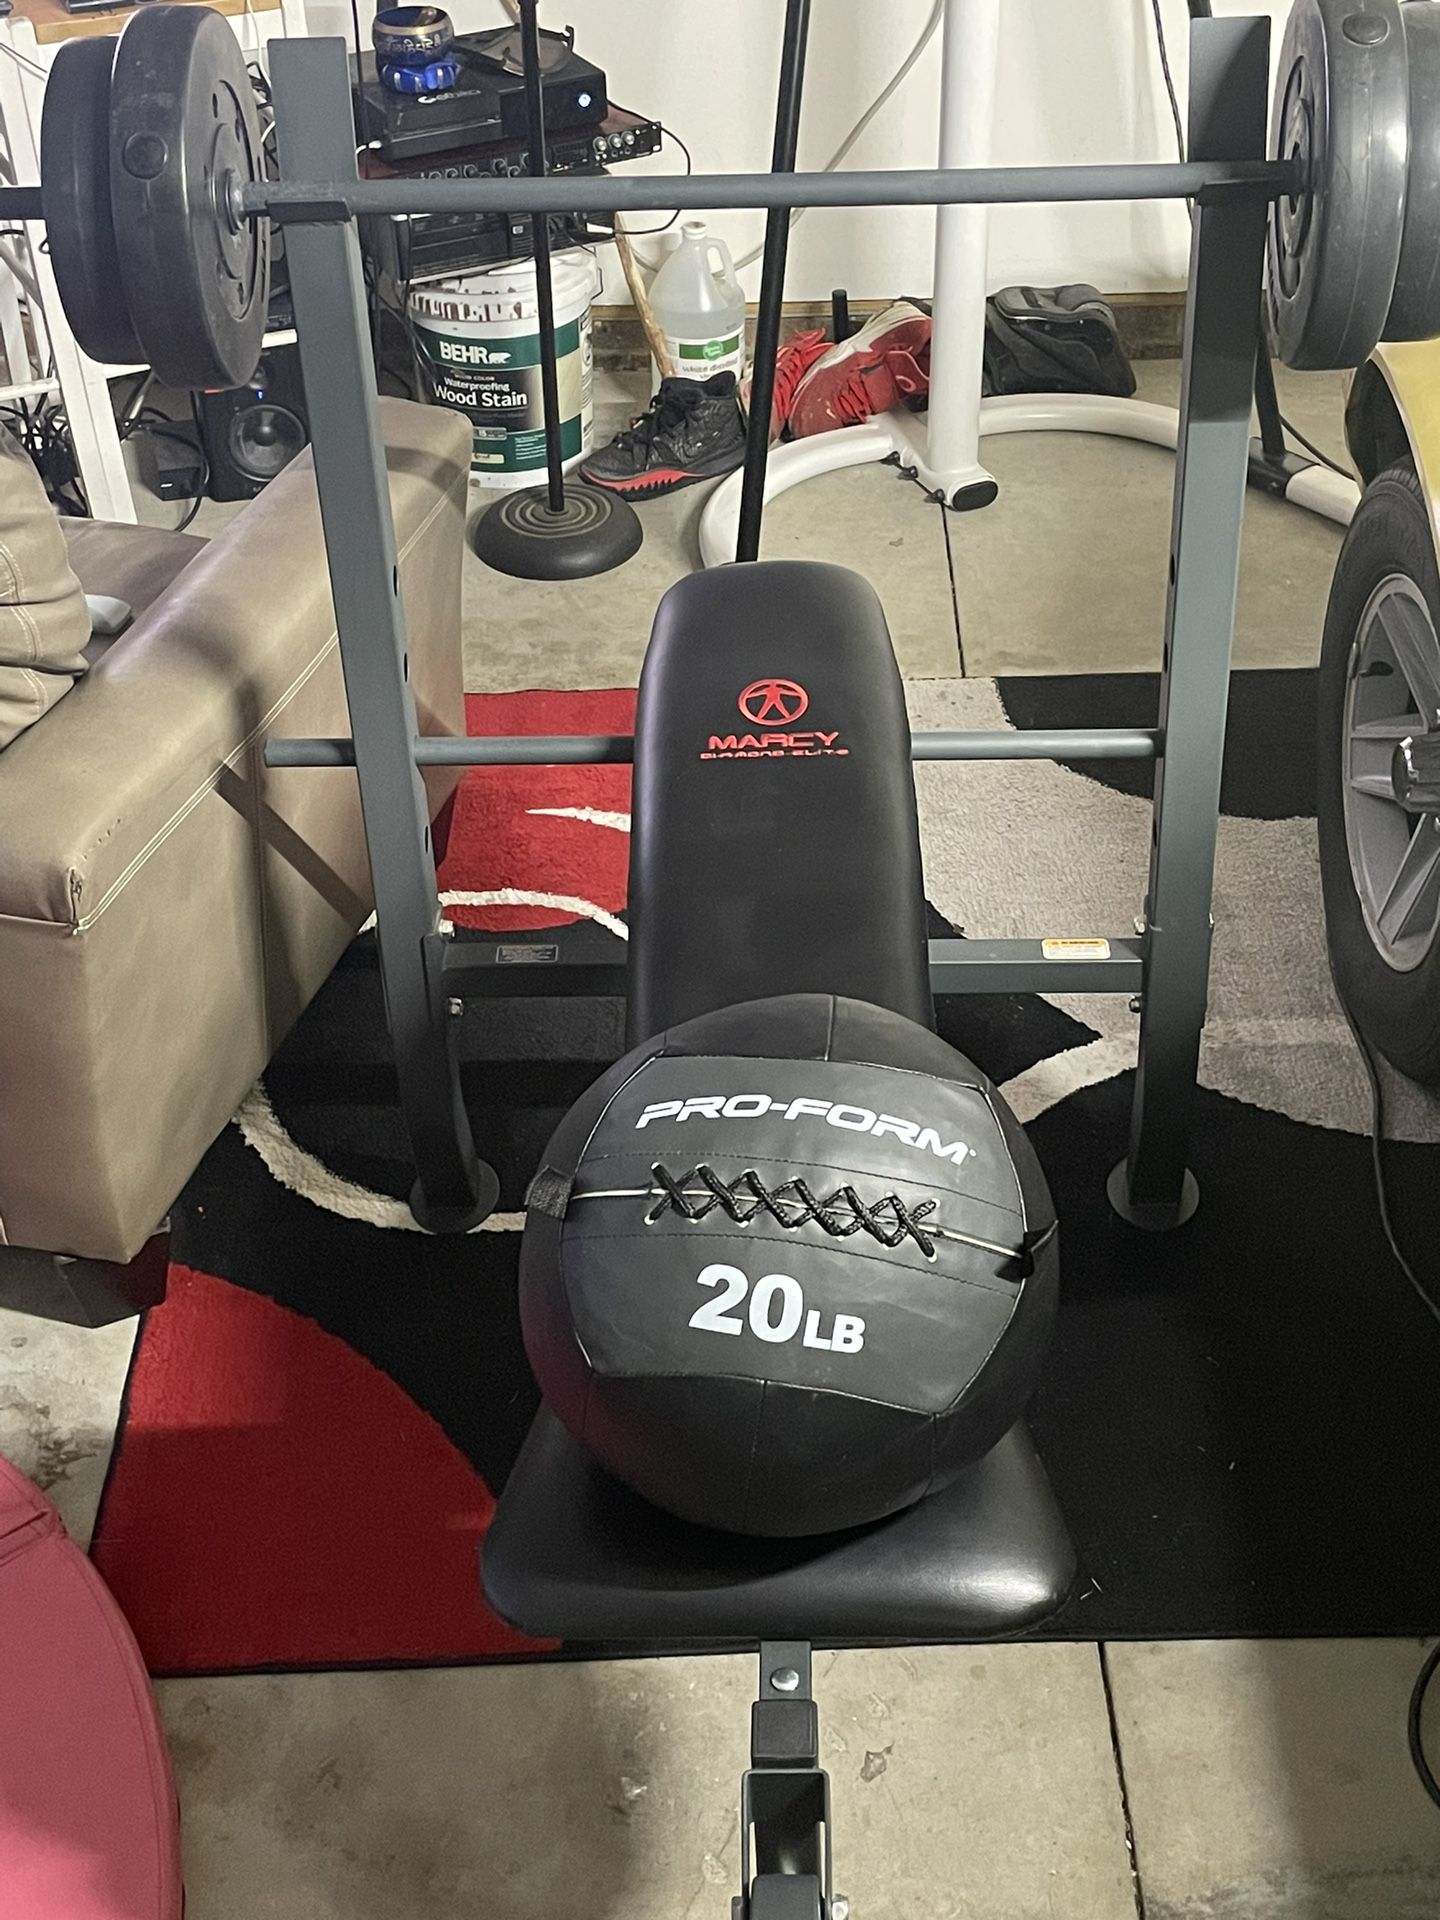 Weight Bench And Weights Set And 20Lb Weight Ball 